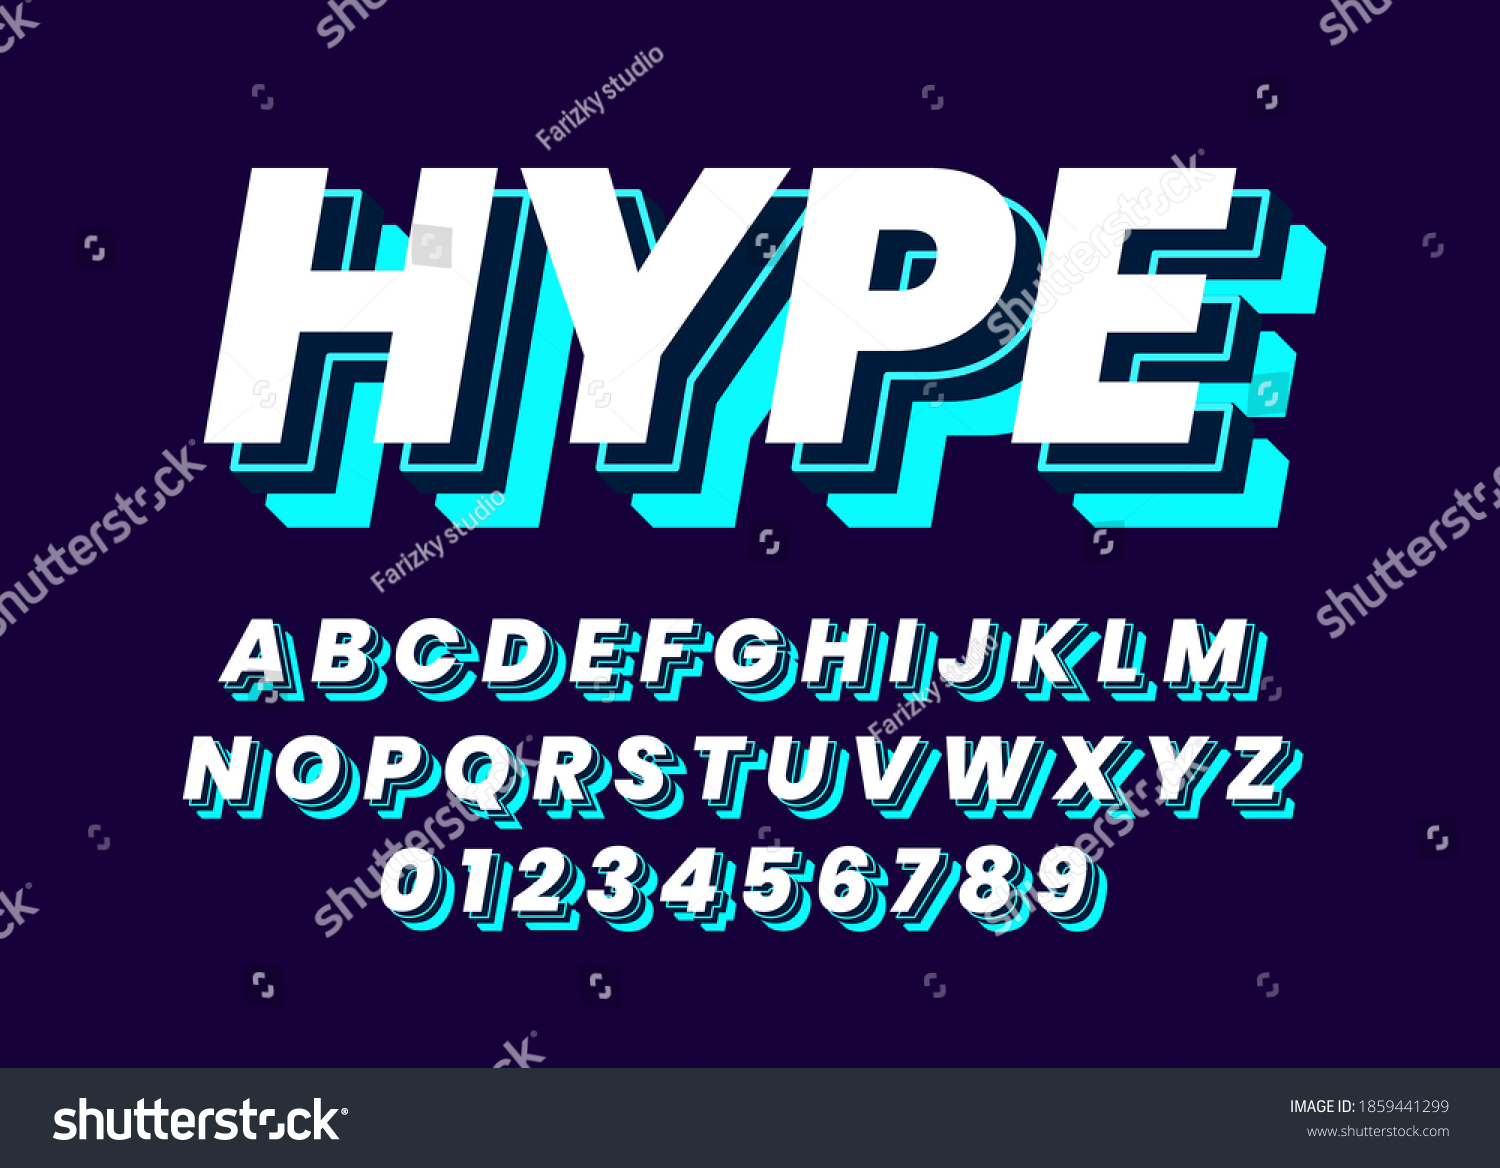 3d Urban Hype Text Style Font Stock Vector (Royalty Free) 1859441299 ...